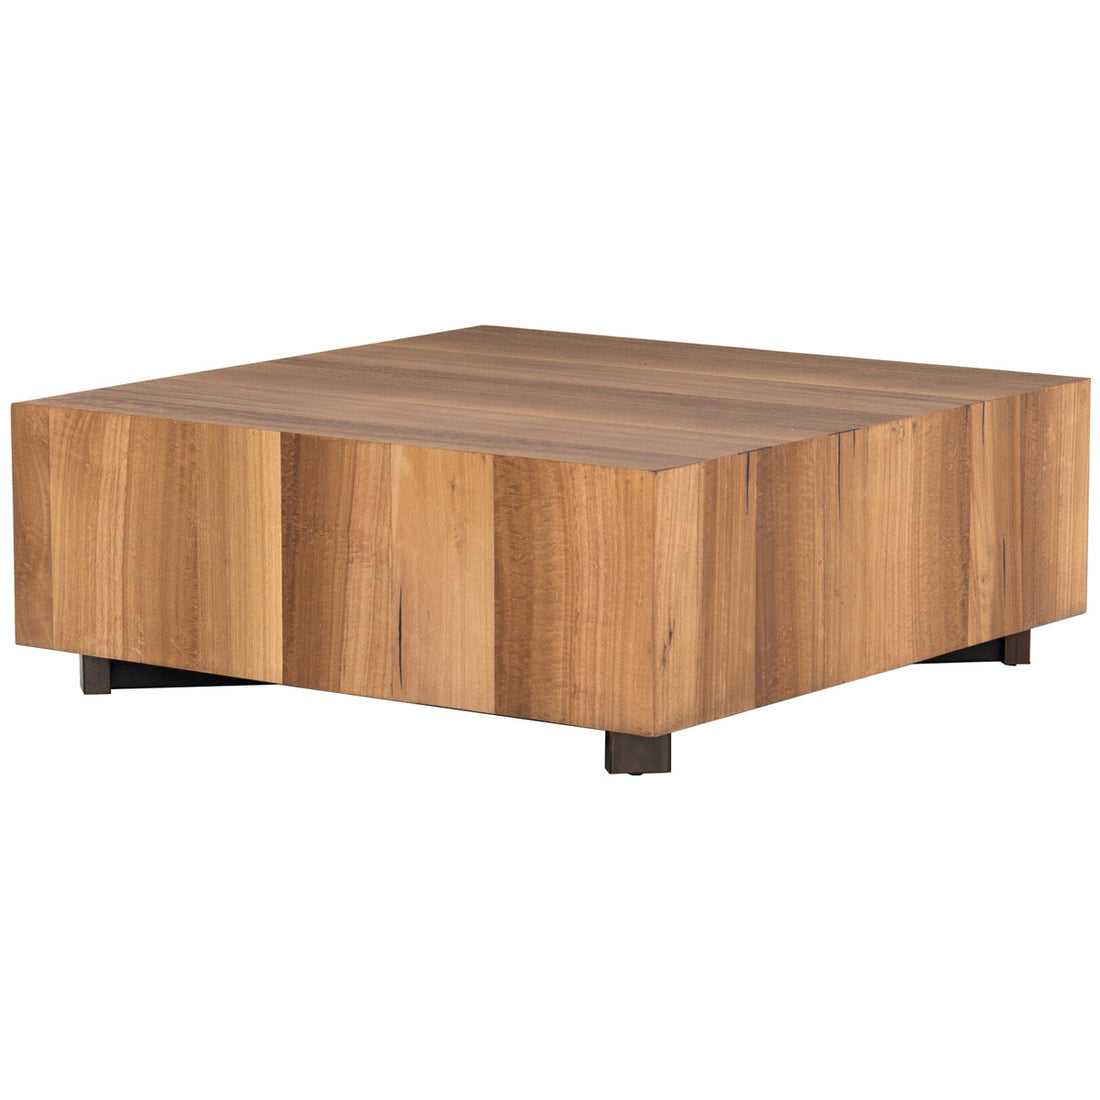 Four Hands Hudson Square Coffee Table - Natural Yukas Resin